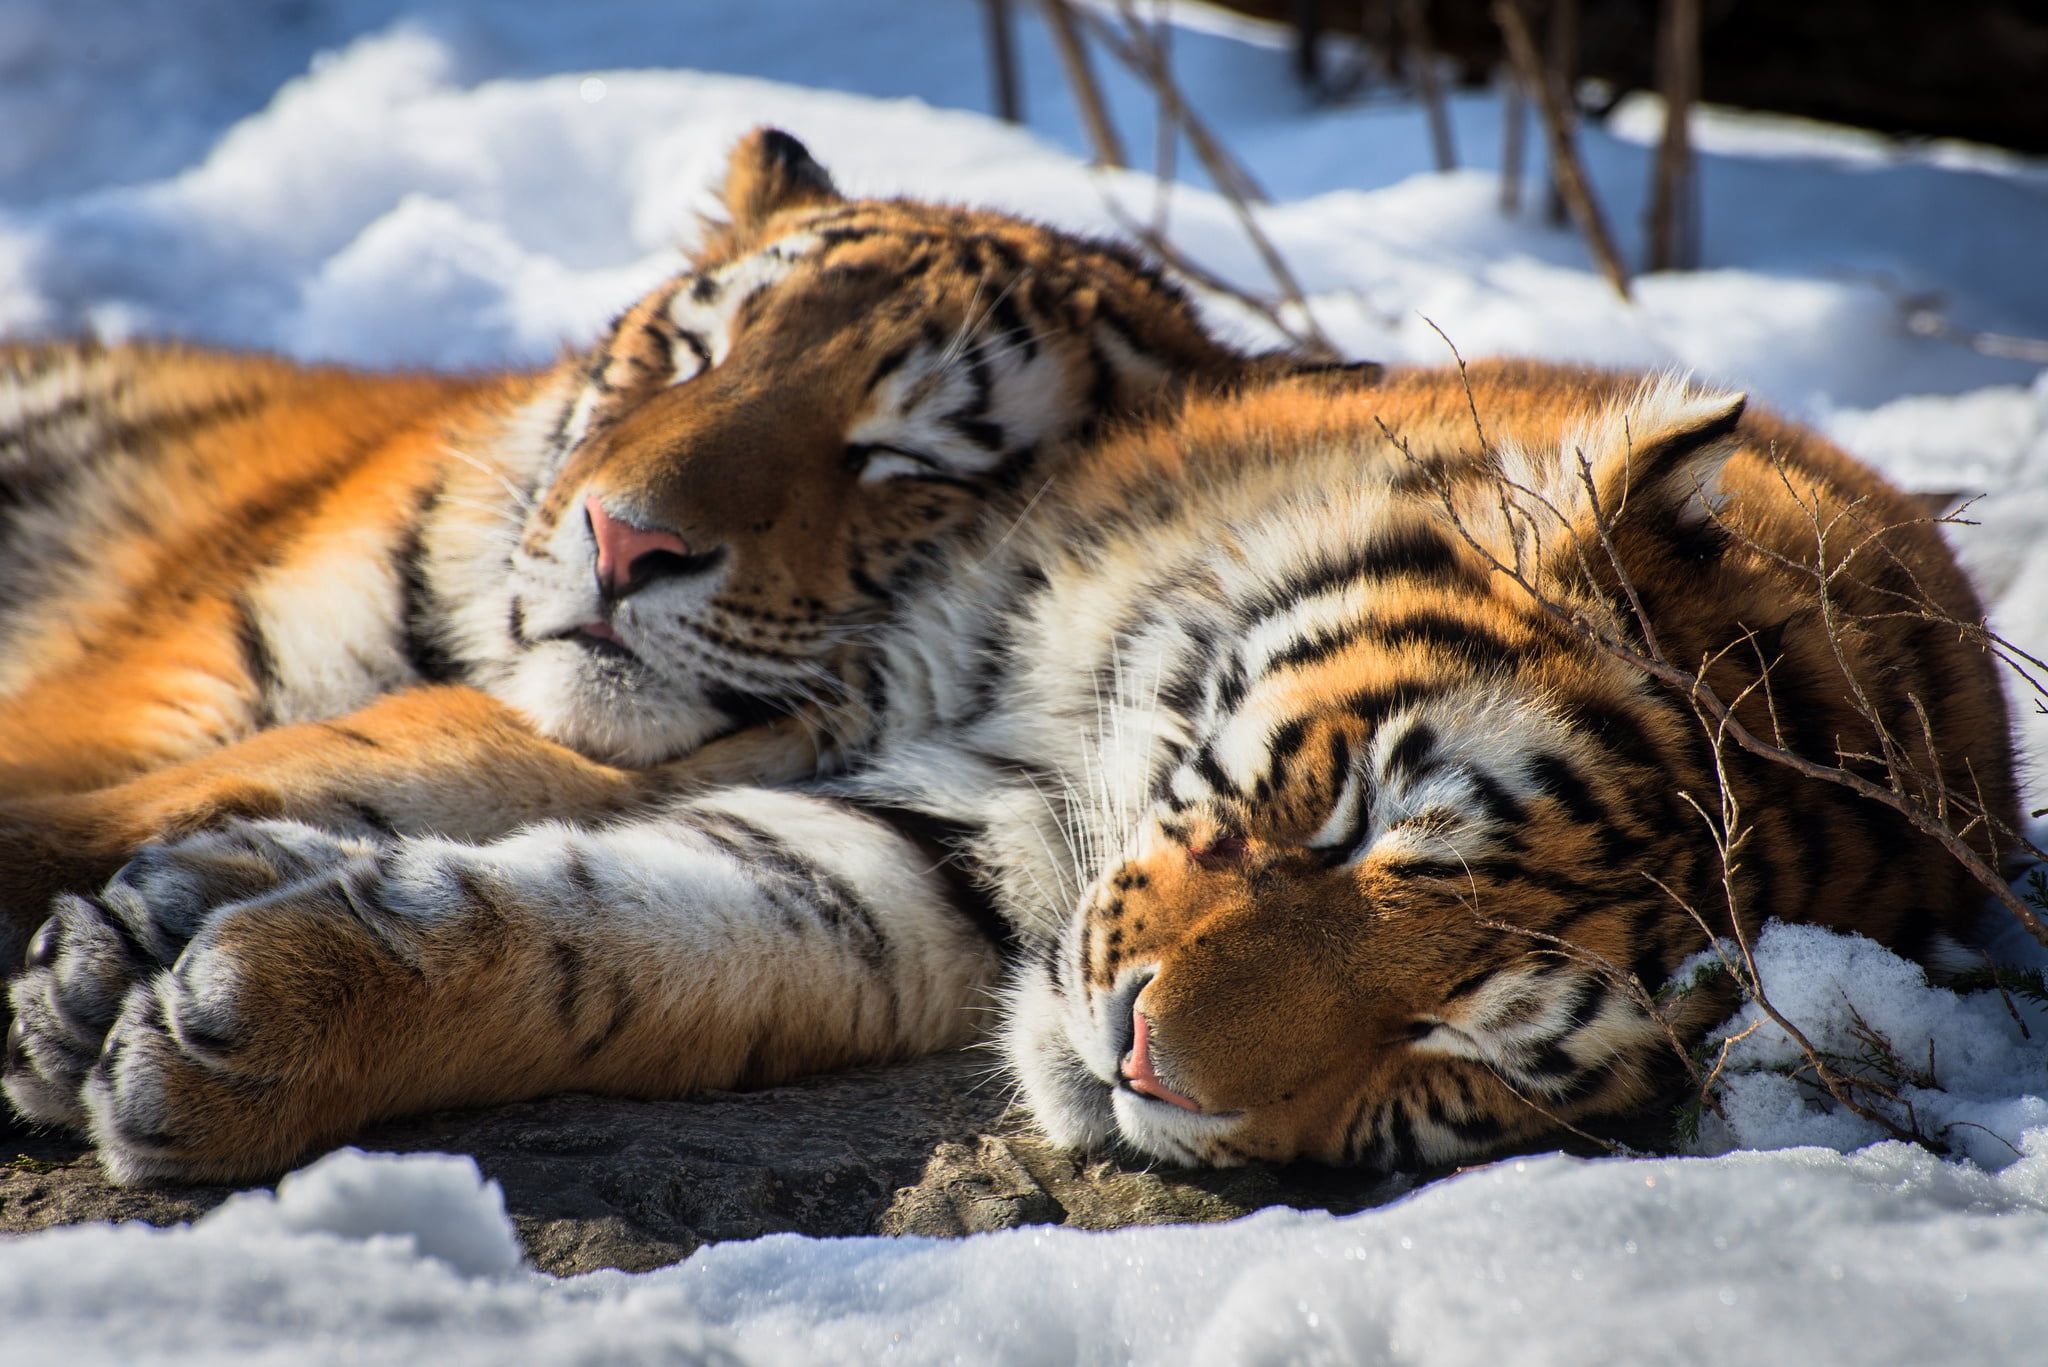 Two tigers, tiger, sleeping, relaxing, animals HD wallpaper